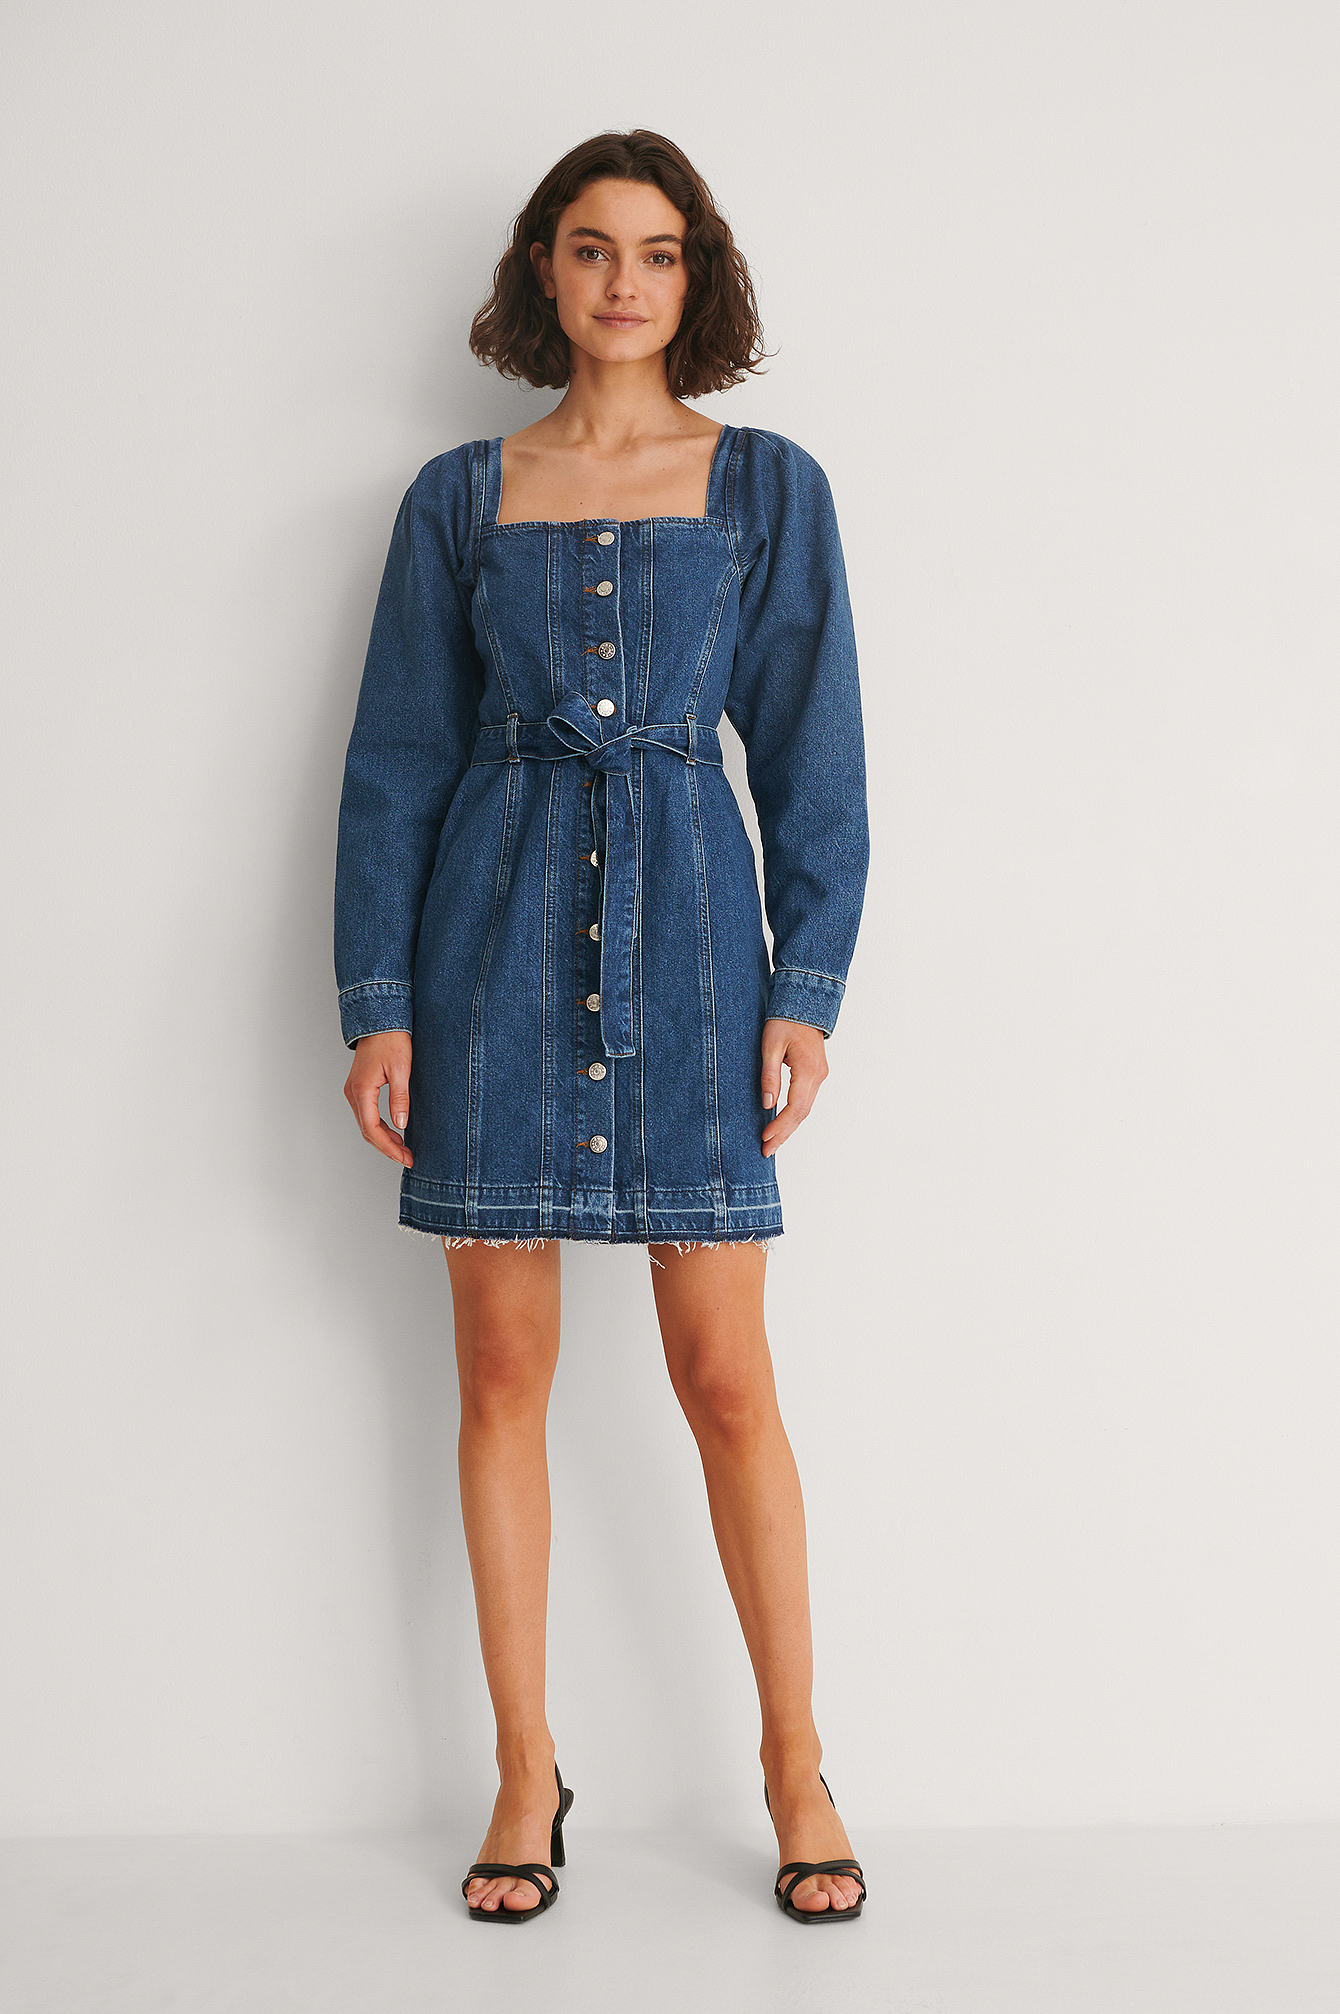 Long Sleeve Belted Denim Dress Outfit.